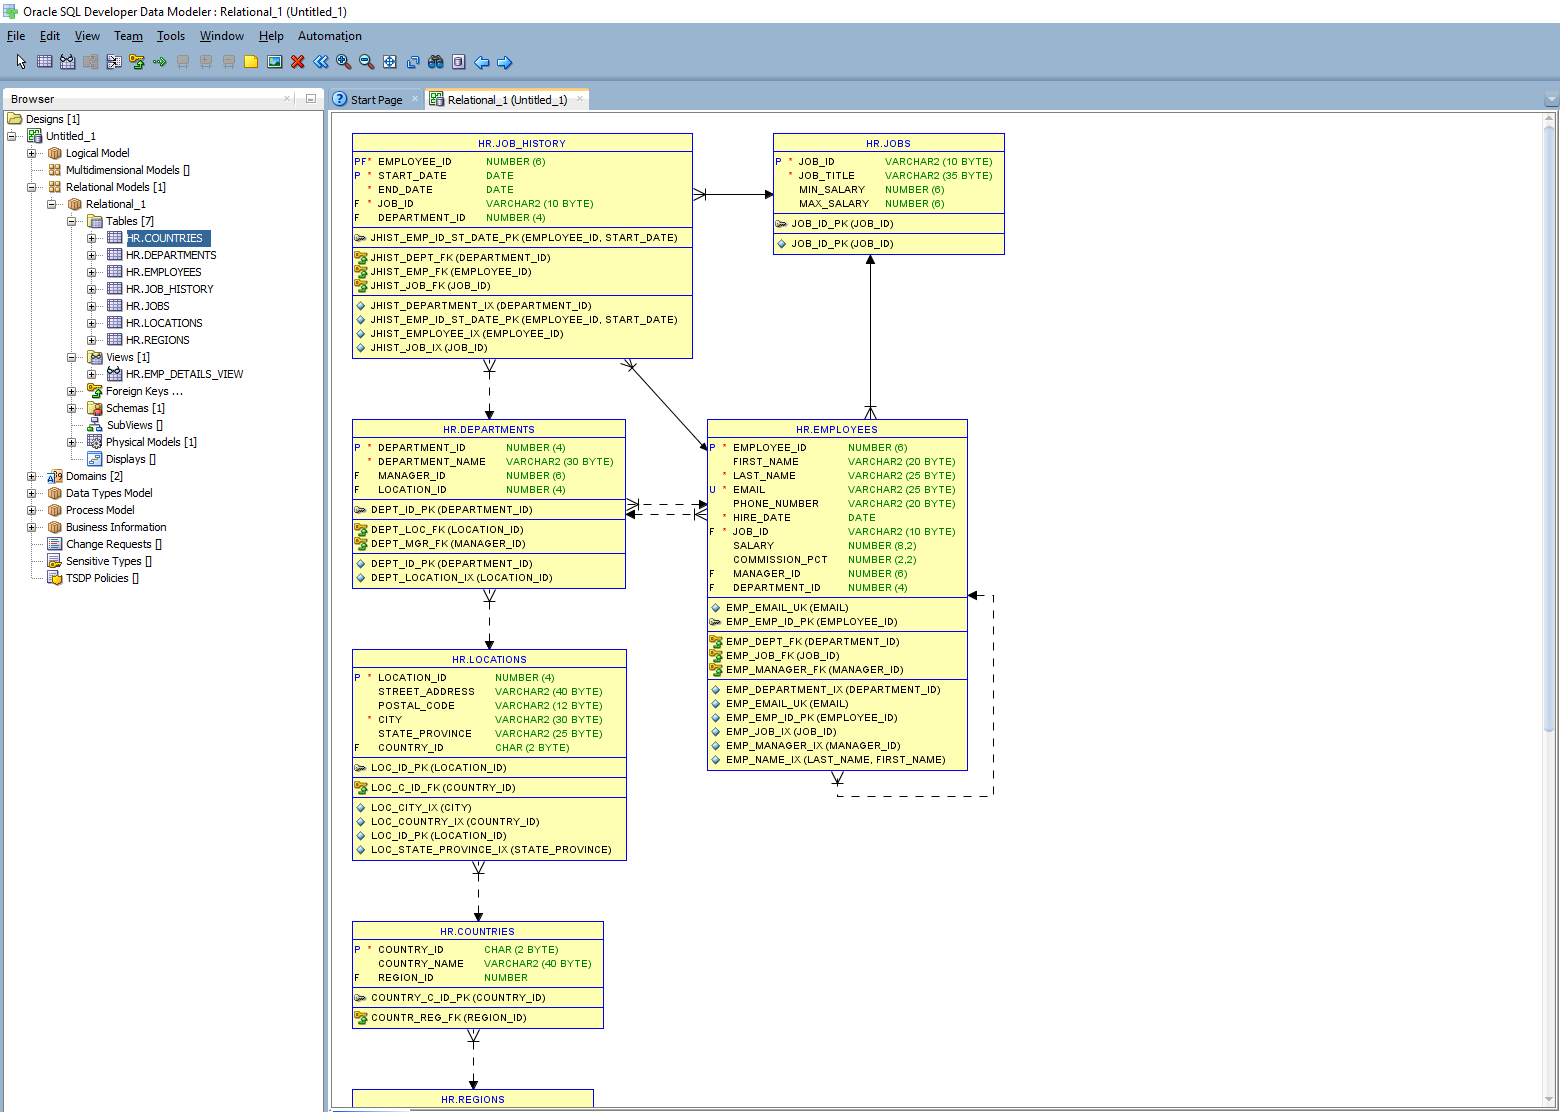 Data Model Diagram How To Create Er Diagram For Existing Database With Oracle Sql